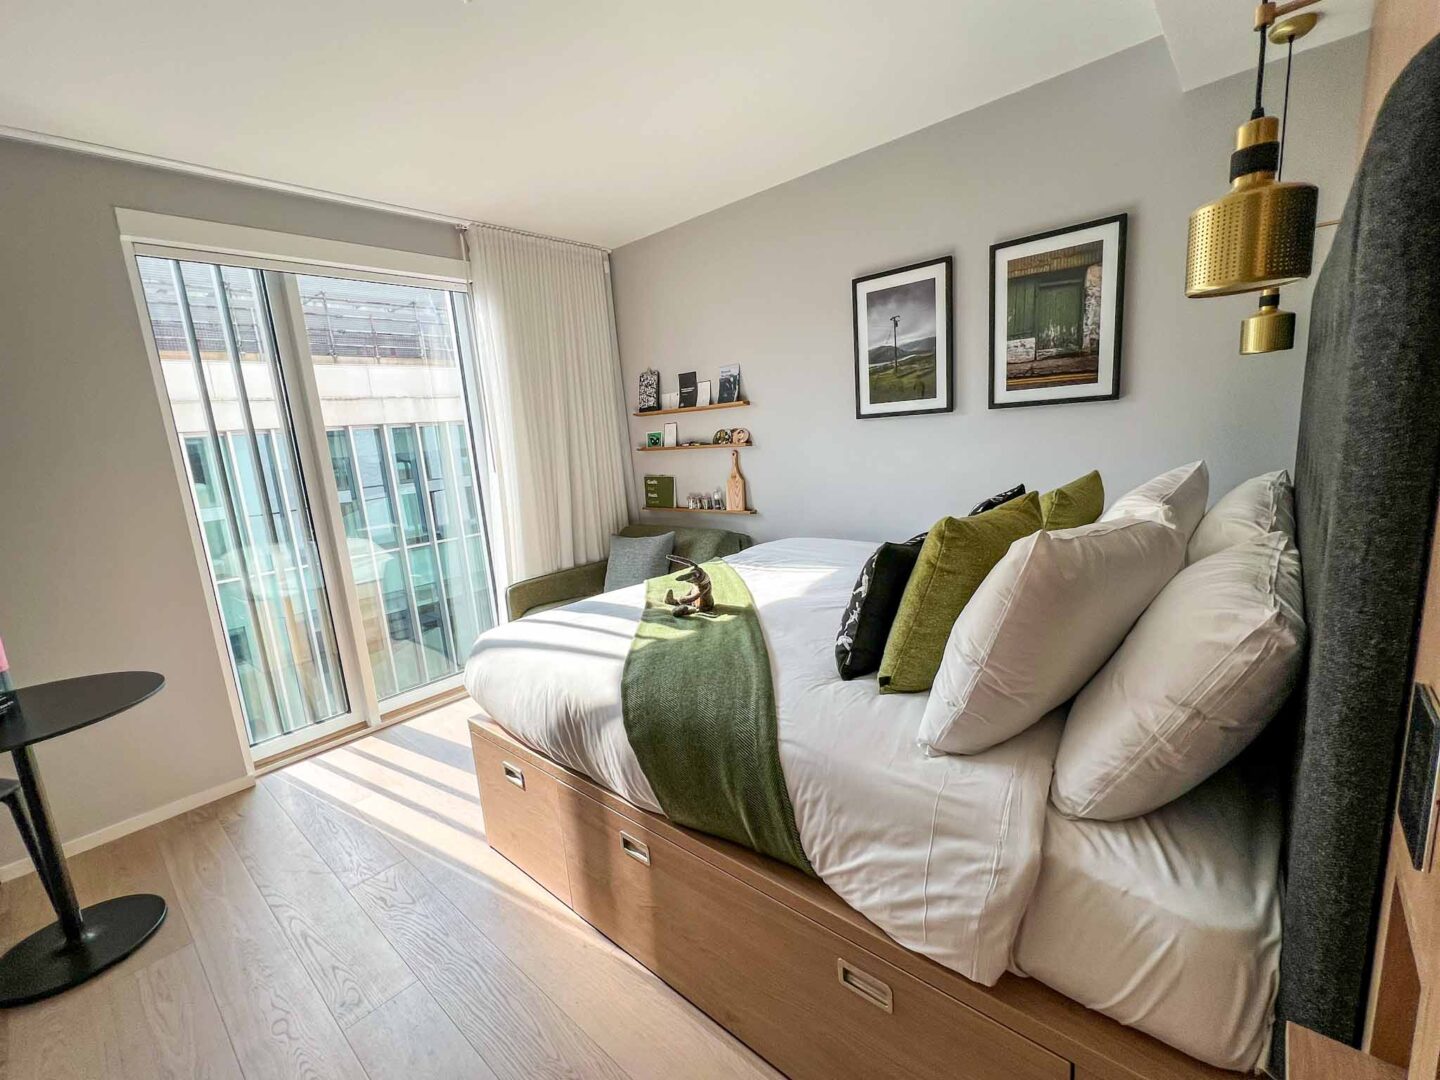 Studio Apartment in Wilde Aparthotel Manchester, one day in Manchester